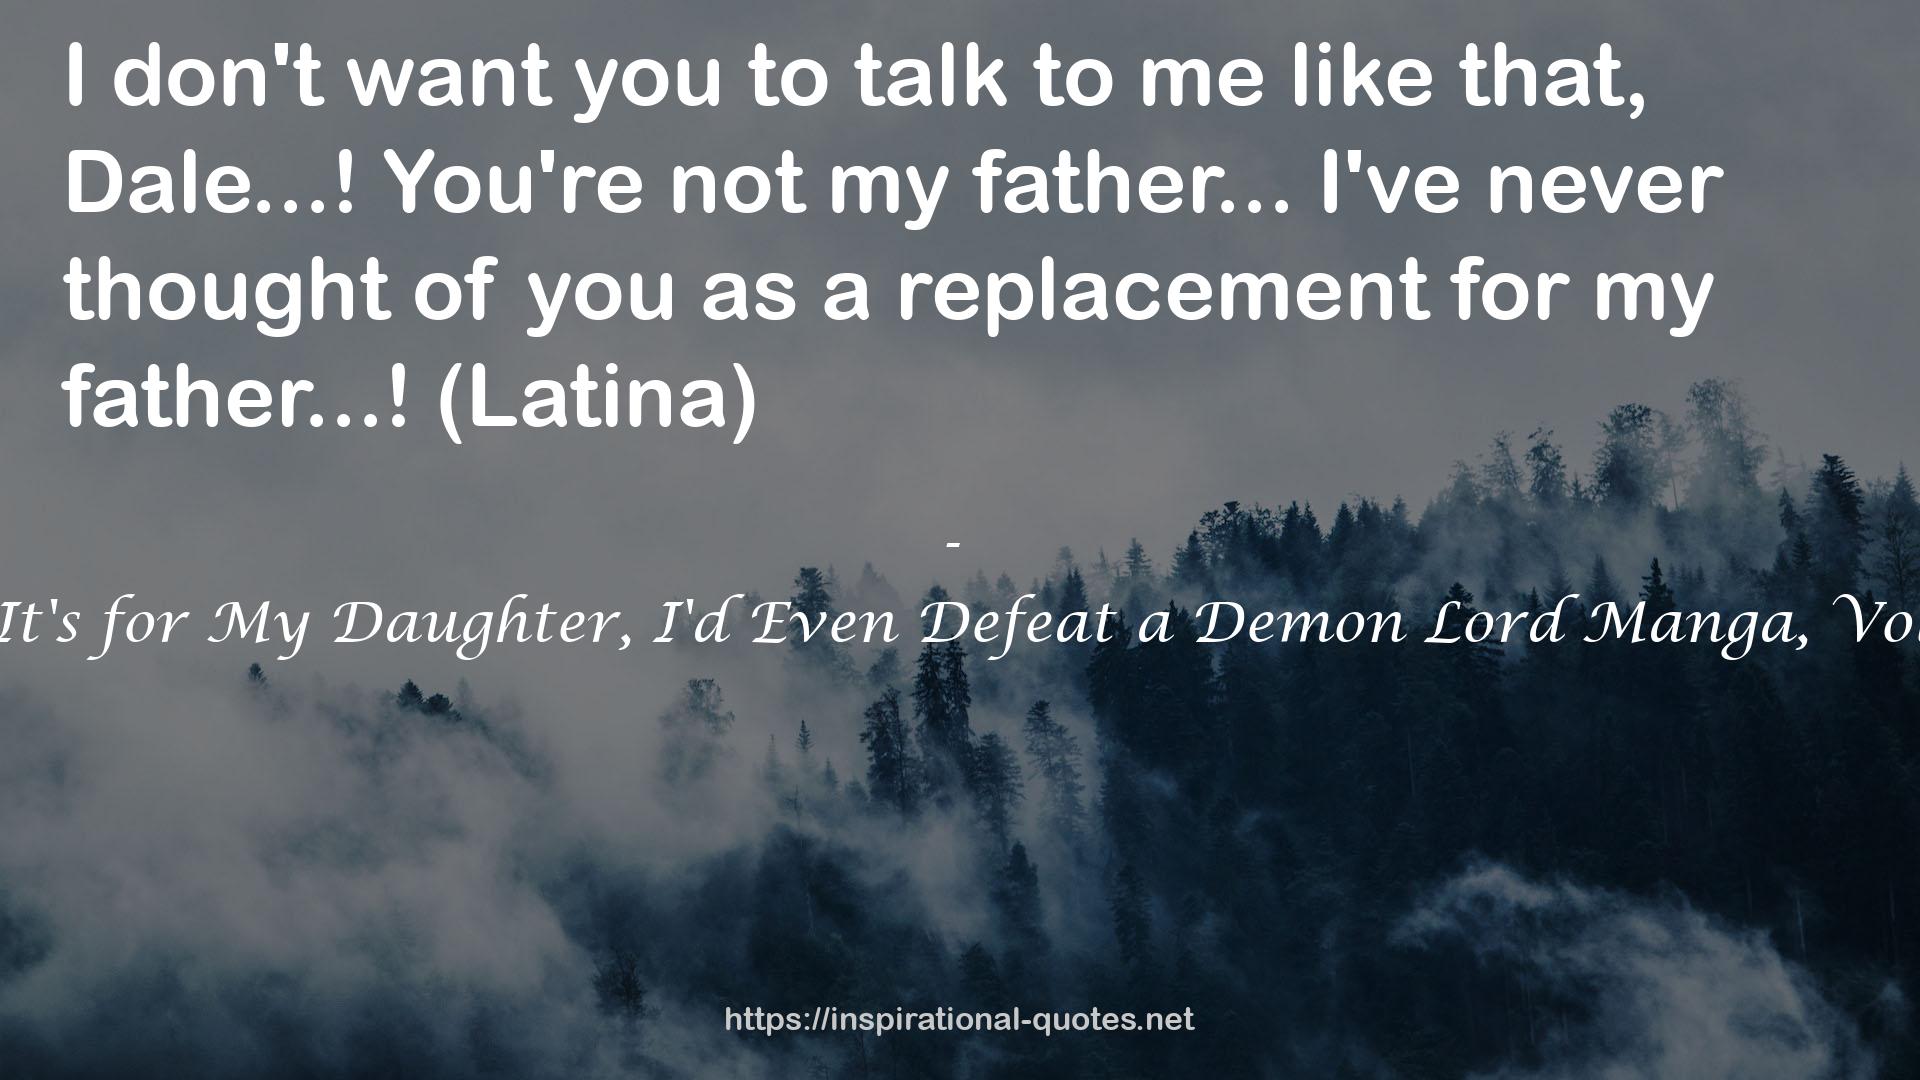 If It's for My Daughter, I'd Even Defeat a Demon Lord Manga, Vol. 2 QUOTES